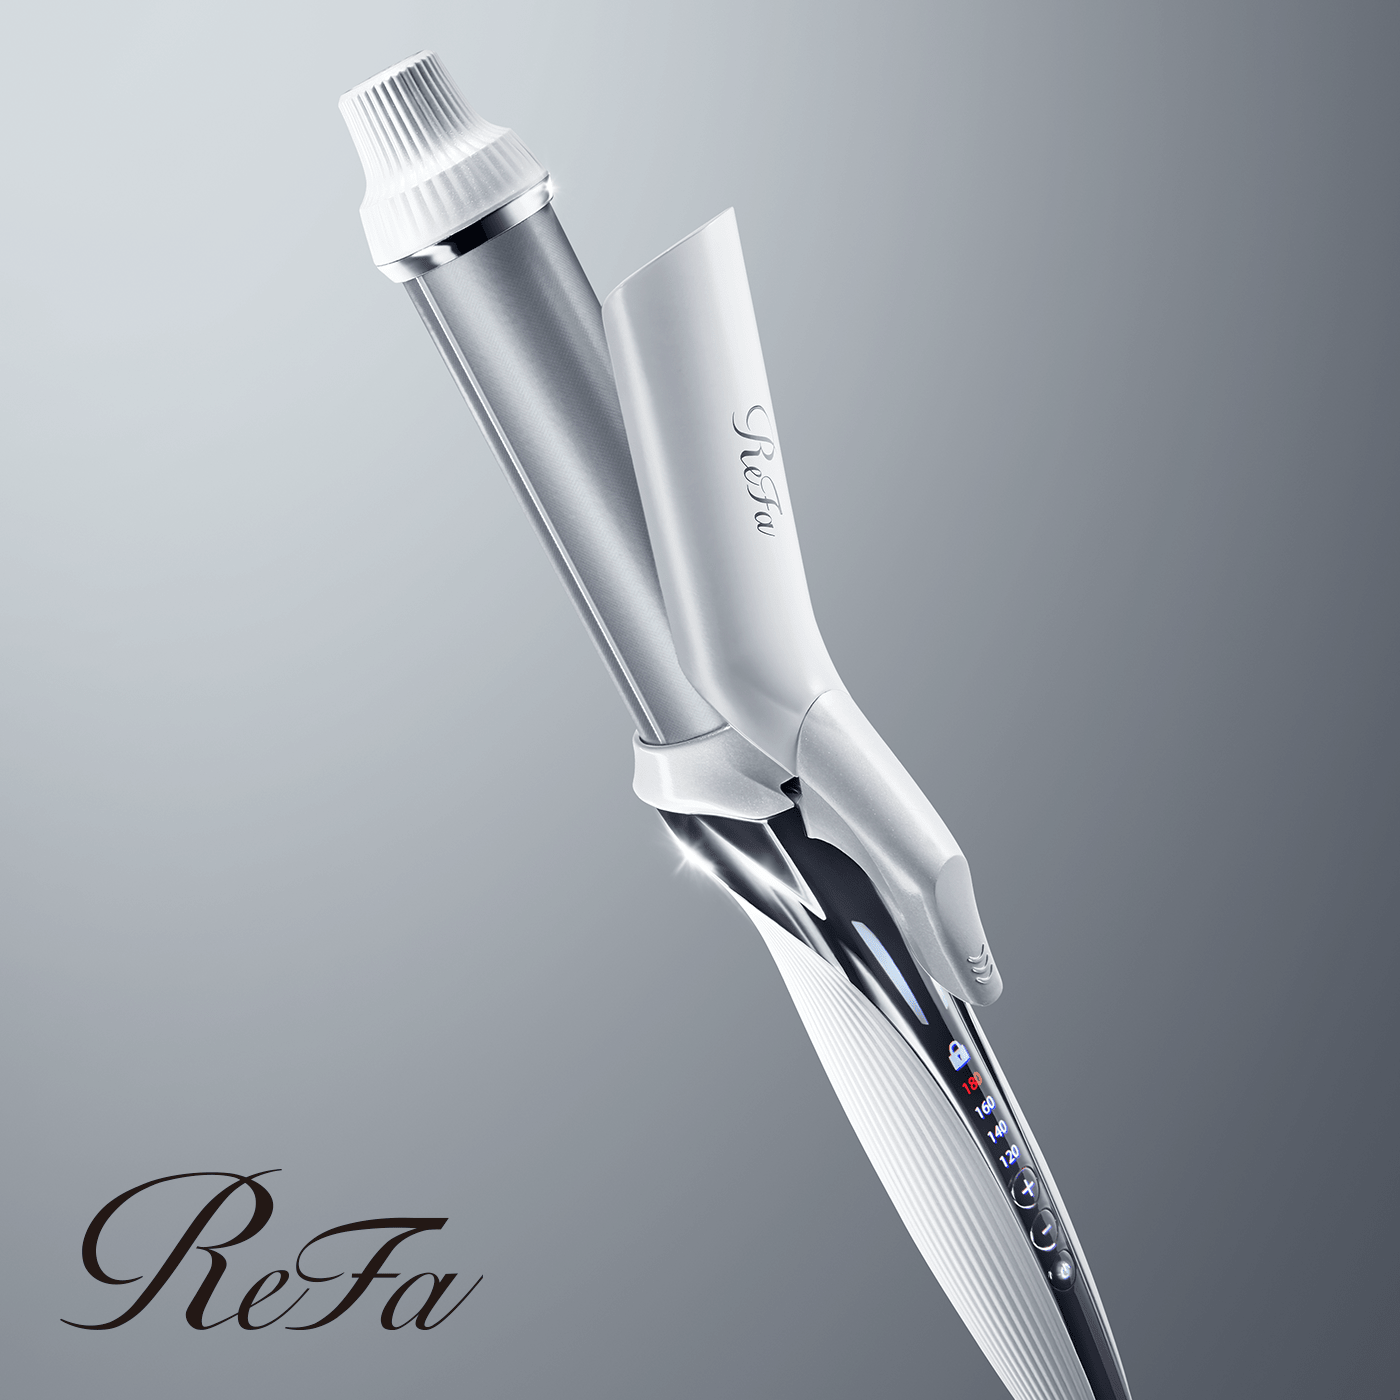 Introducing the ReFa BEAUTECH CURL IRON, a hairstyling tool